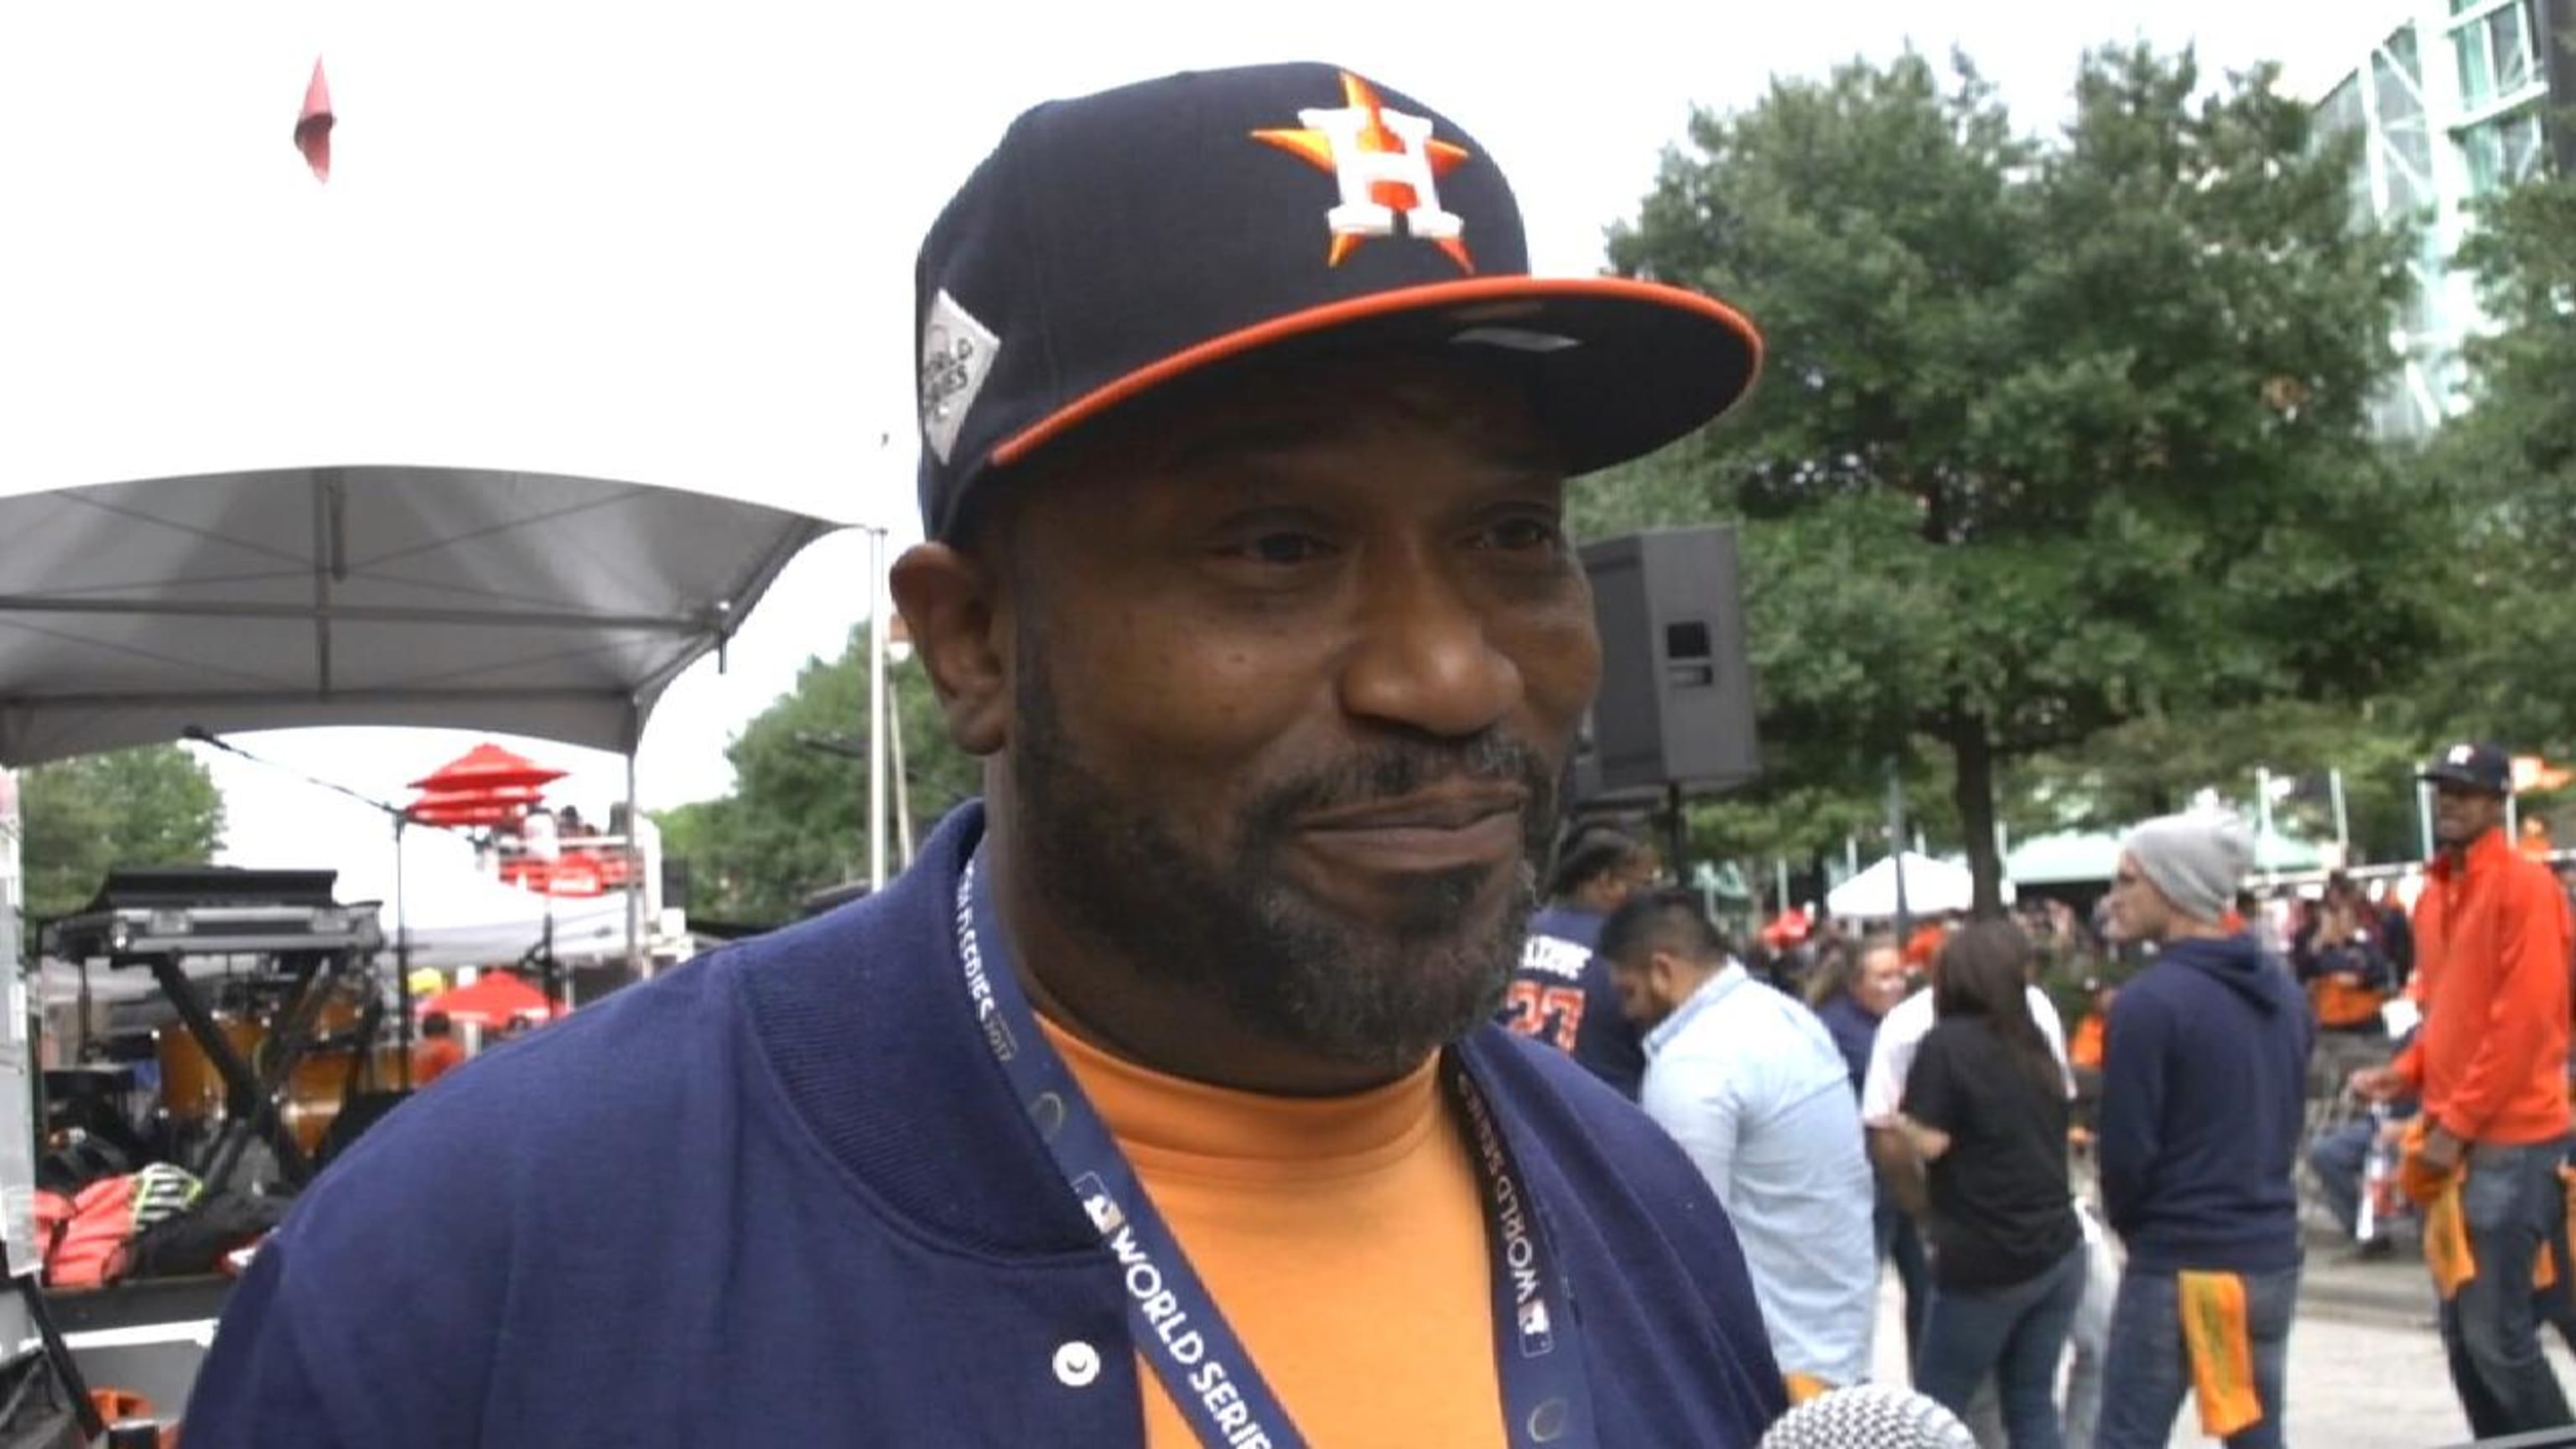 Watch rapper Bun B sum up the atmosphere in Houston at World